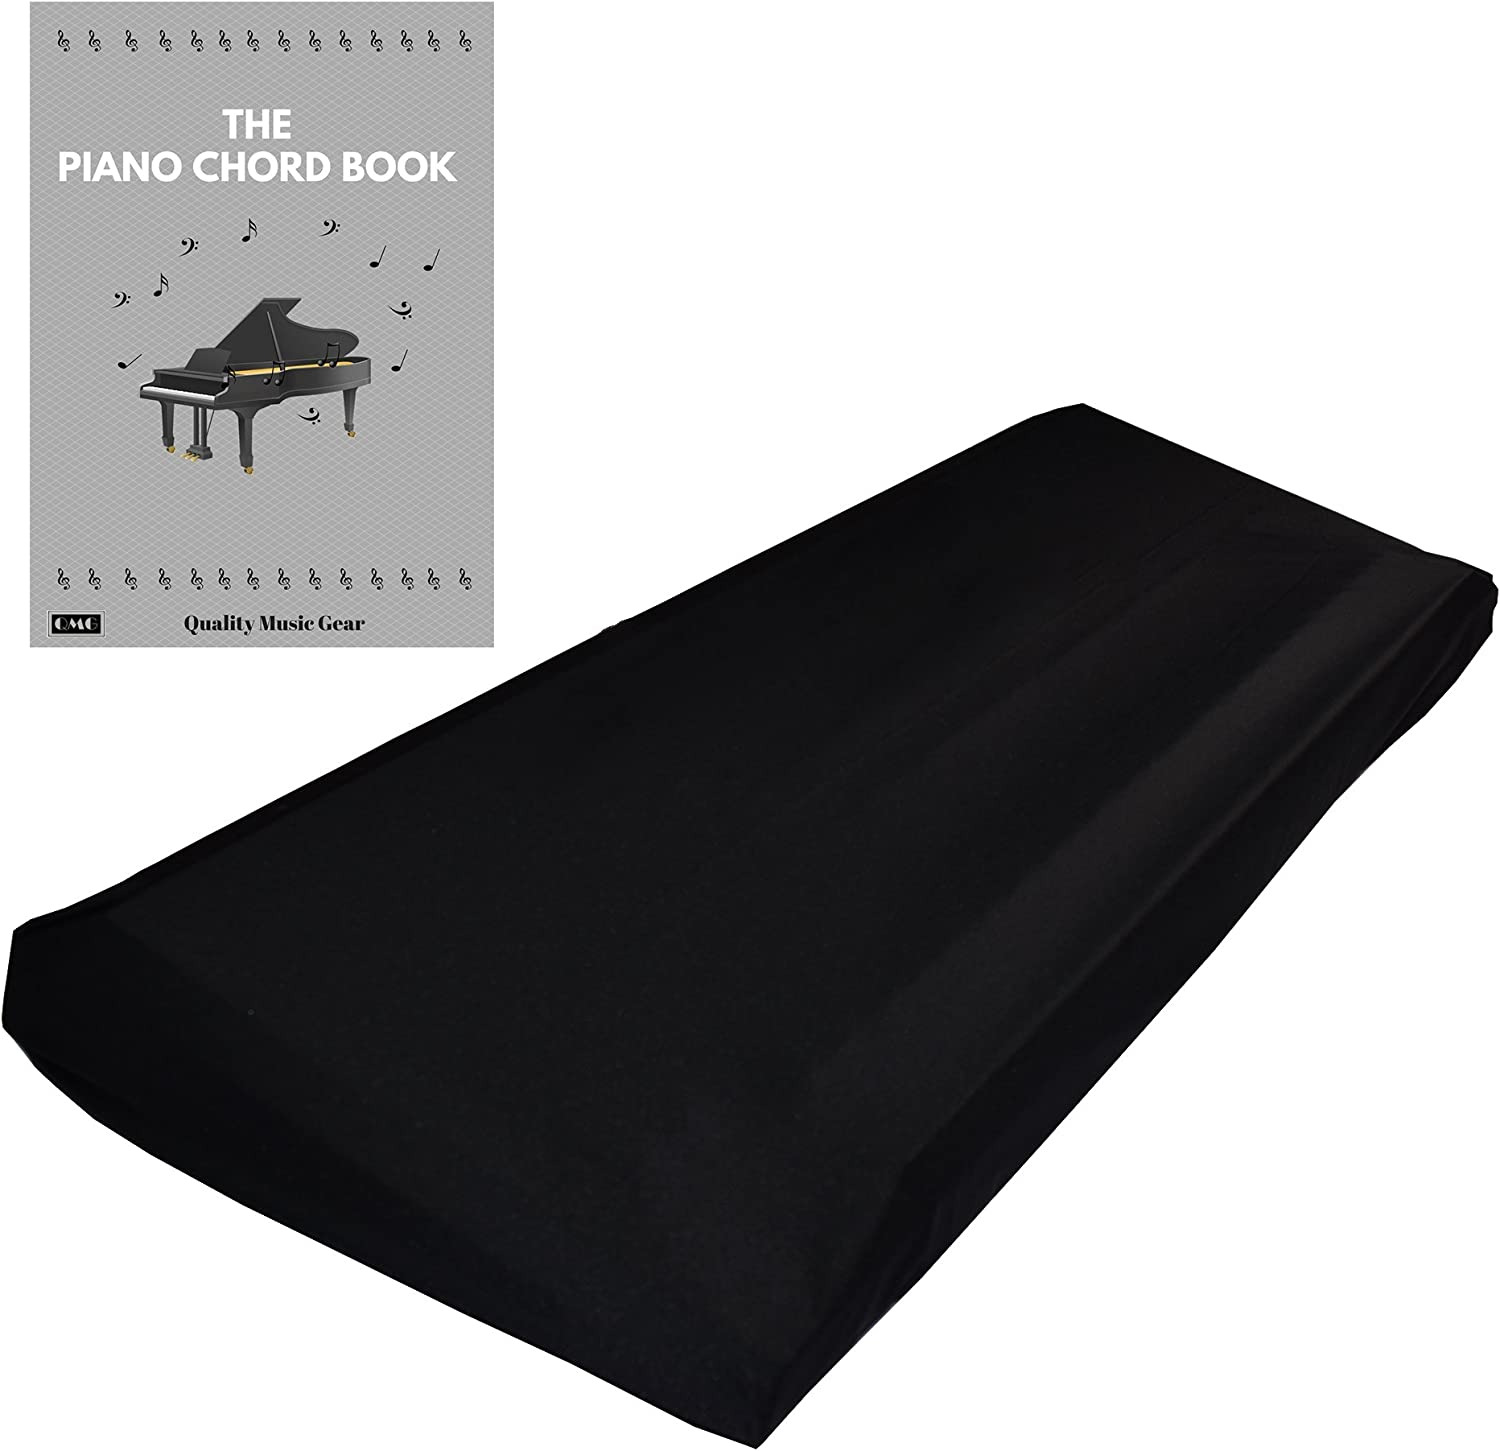 Stretchable Keyboard Dust Cover for 88 Key-Keyboard: Best for All Digital Pianos